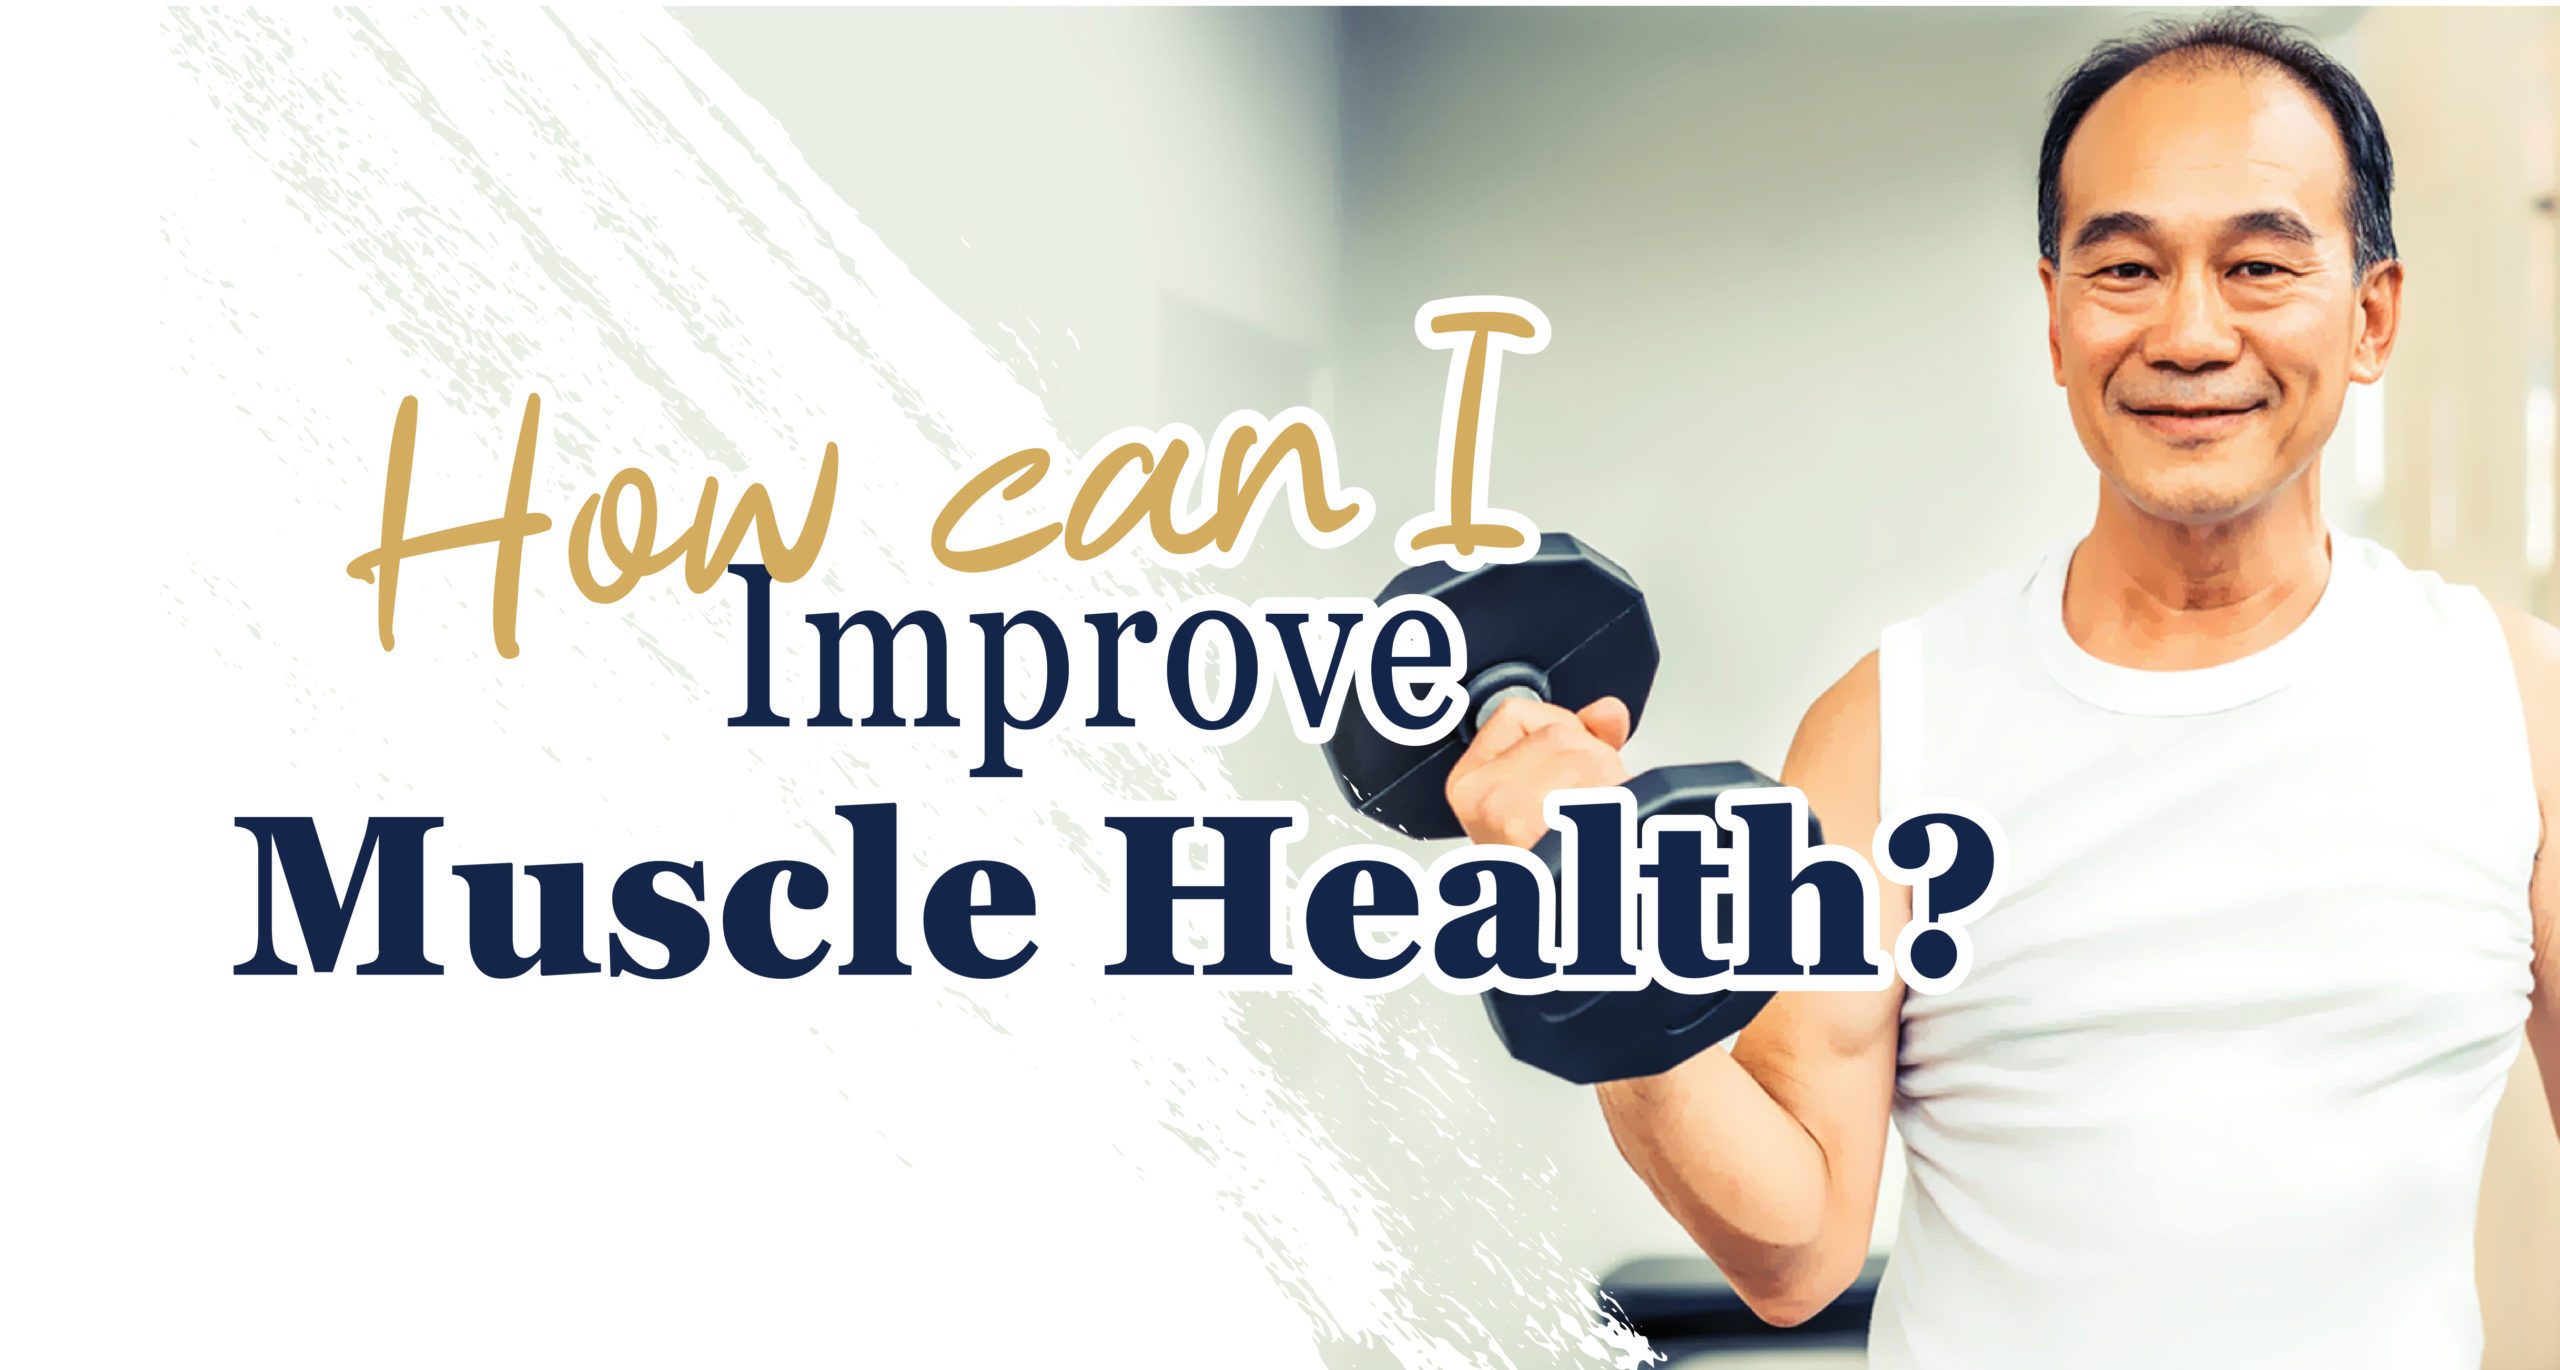 How can I build healthy muscles? - Alpro Pharmacy